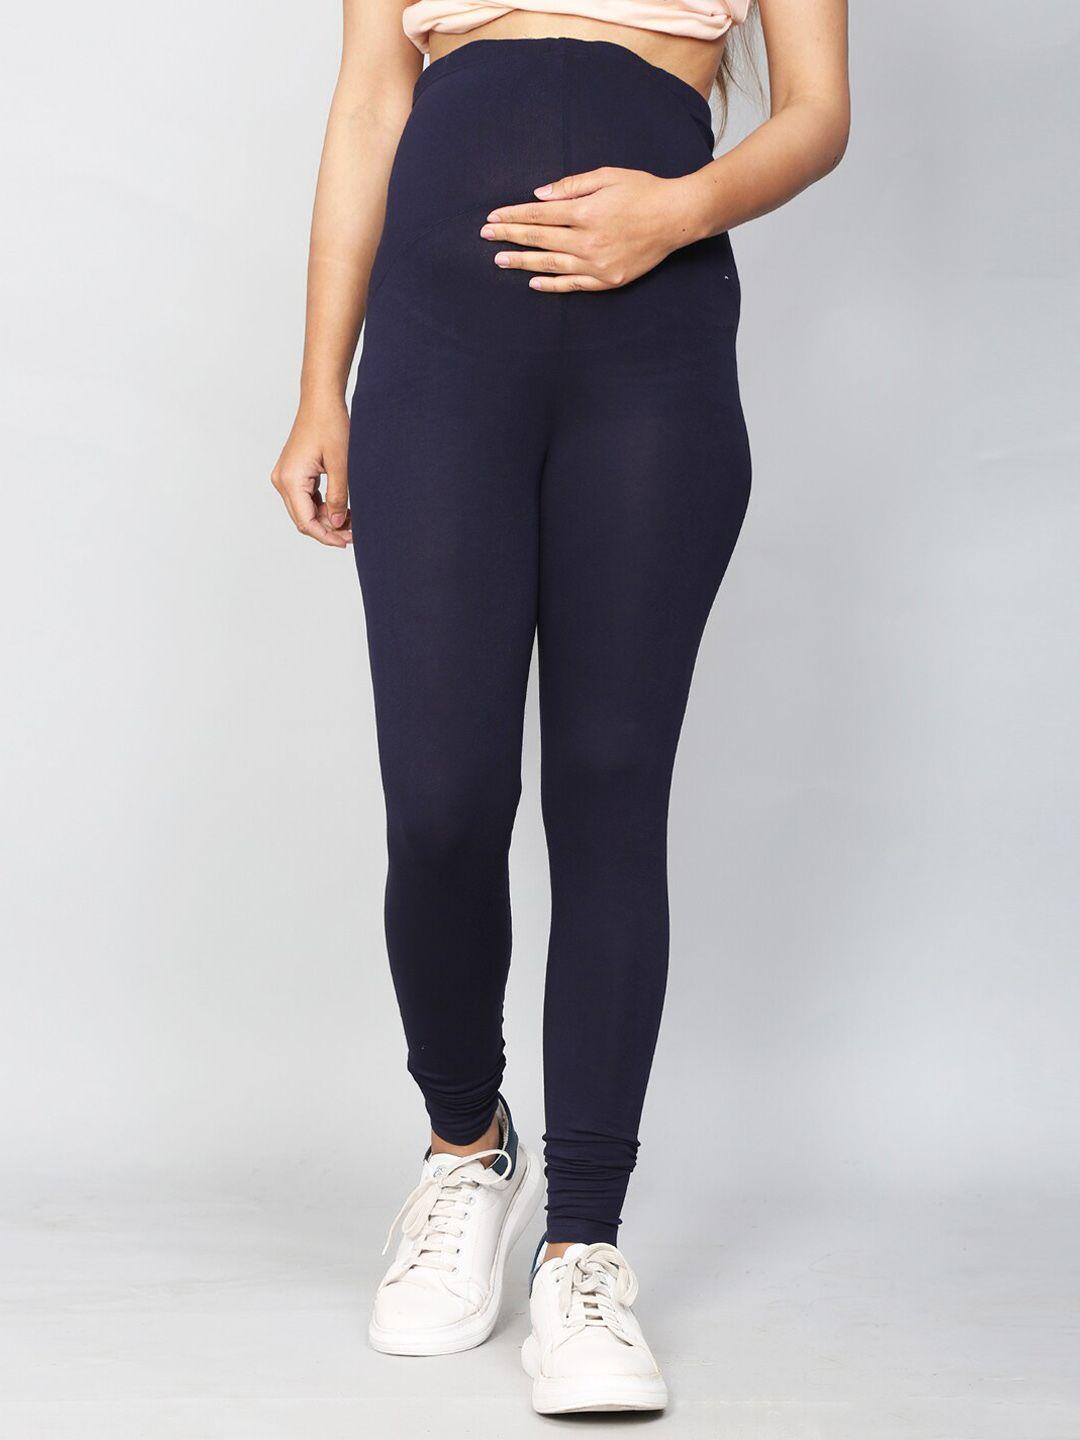 sillyboom women navy blue solid maternity stretchable leggings